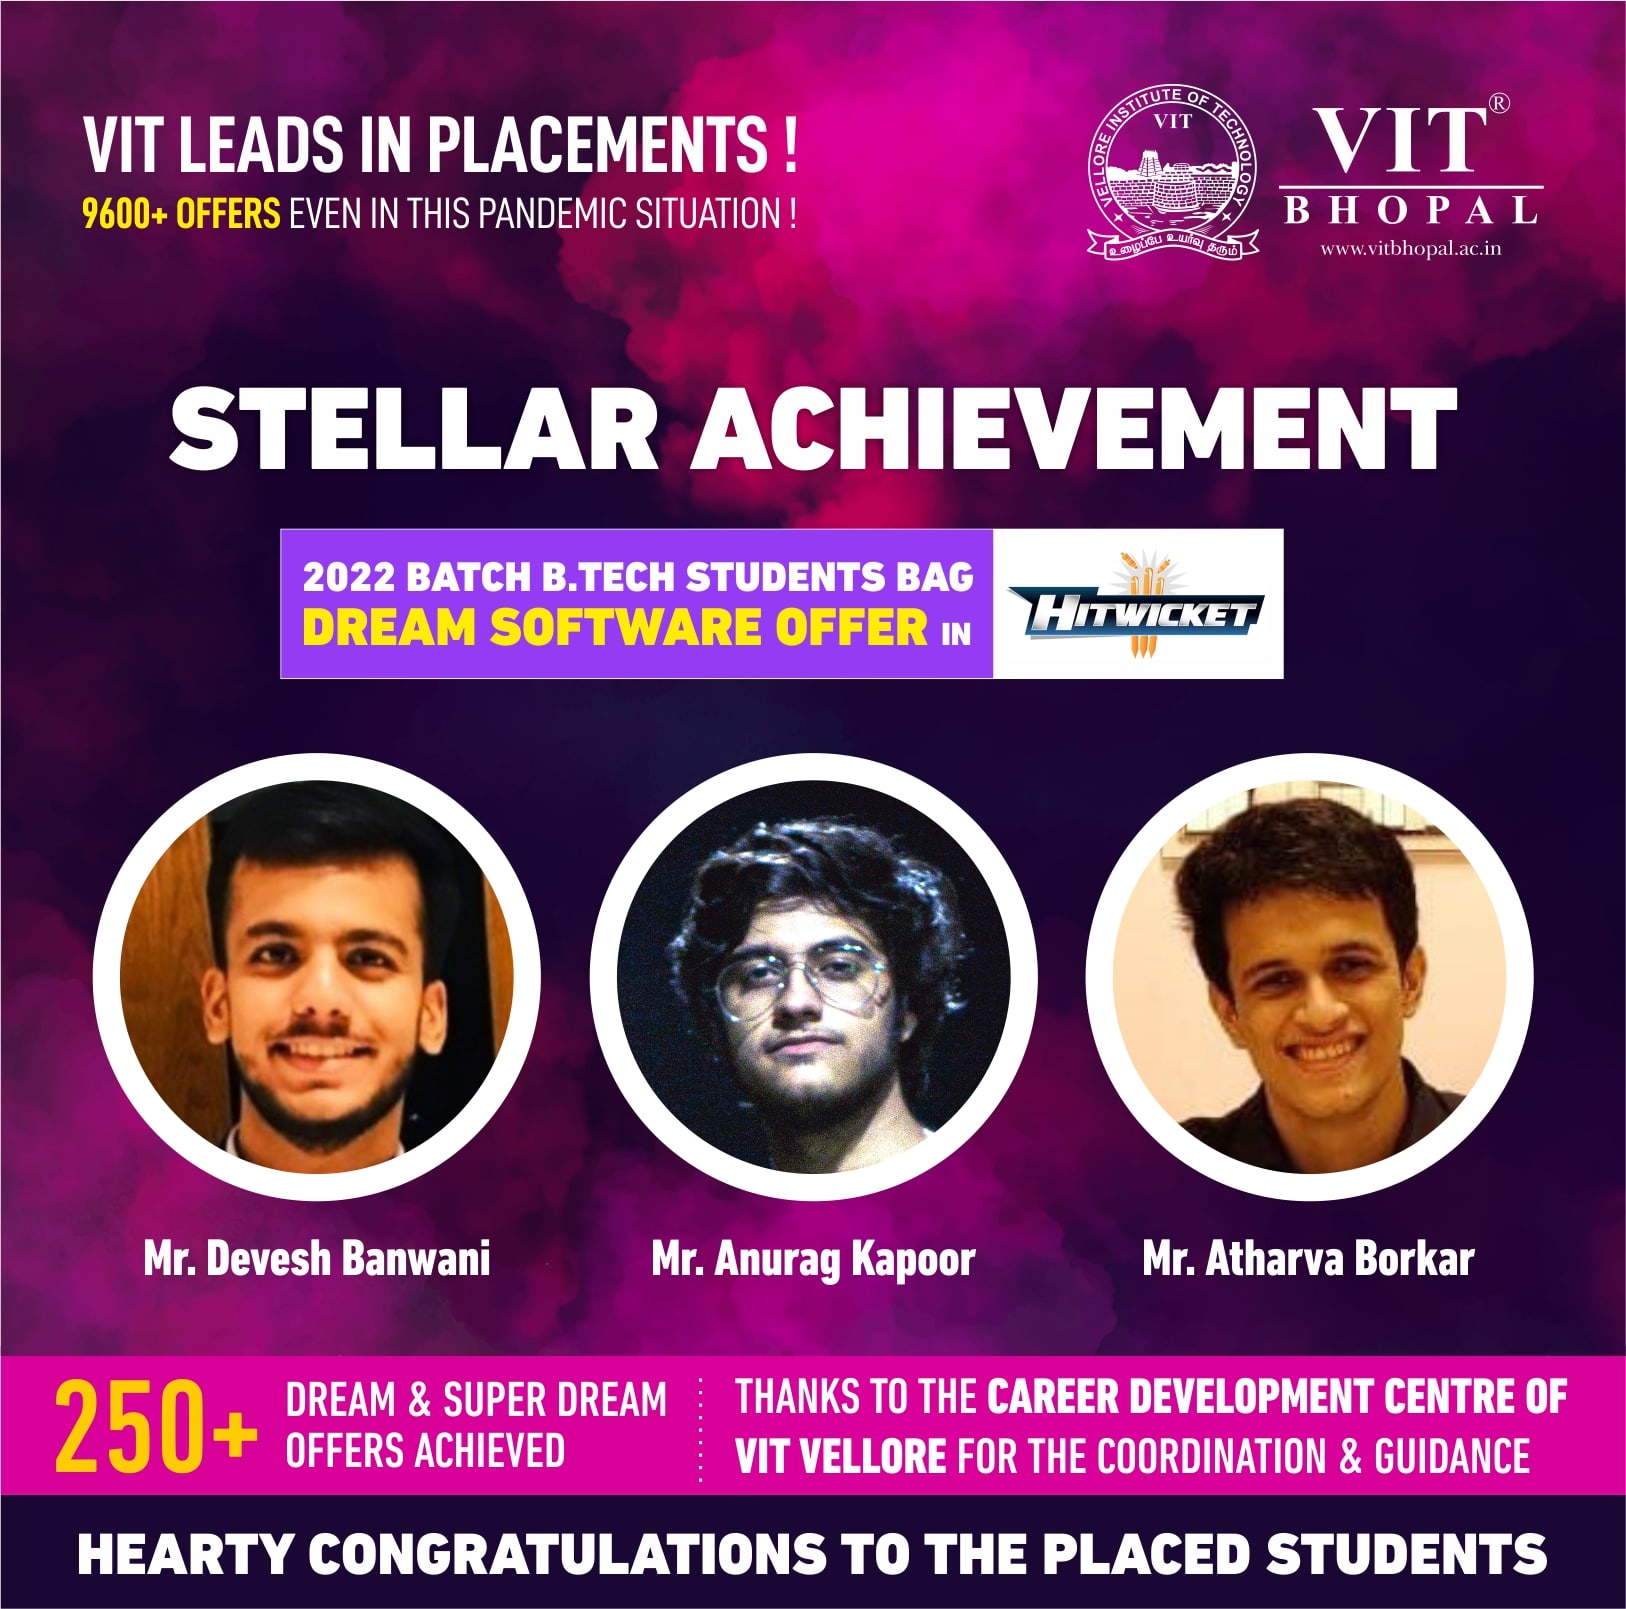 VIT Bhopal  - Best University in Central India -  Placement-Hitwicket1-min